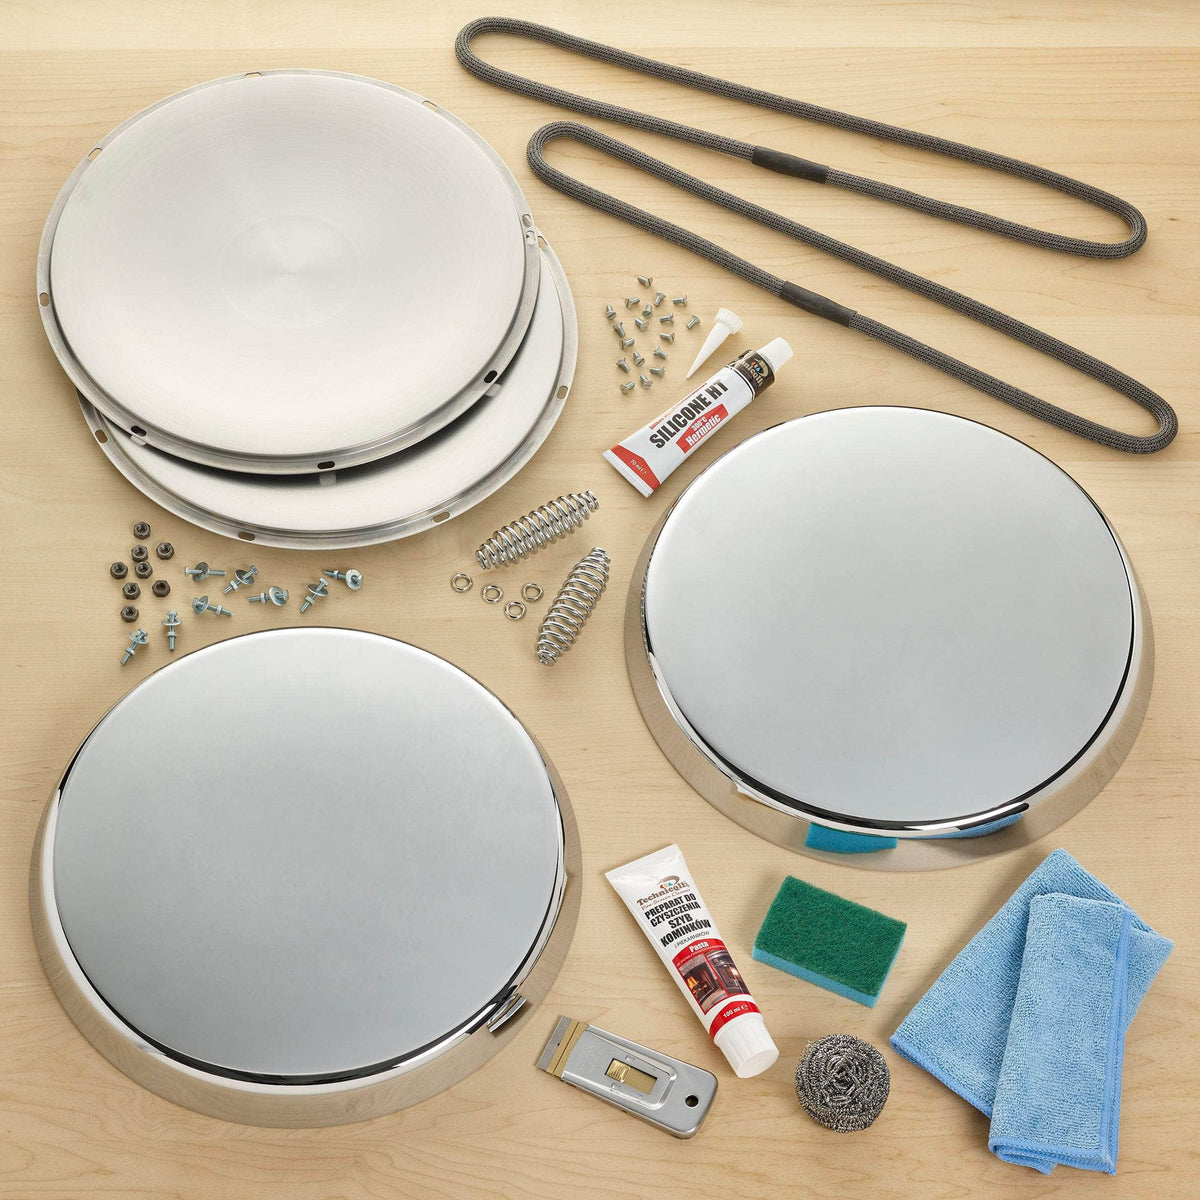 Complete Stainless Steel Lid Refurb Kit for use with Aga range cookers Deep chrome tops (4cm) / 90mm to fit all Aga range cookers made pre-1994